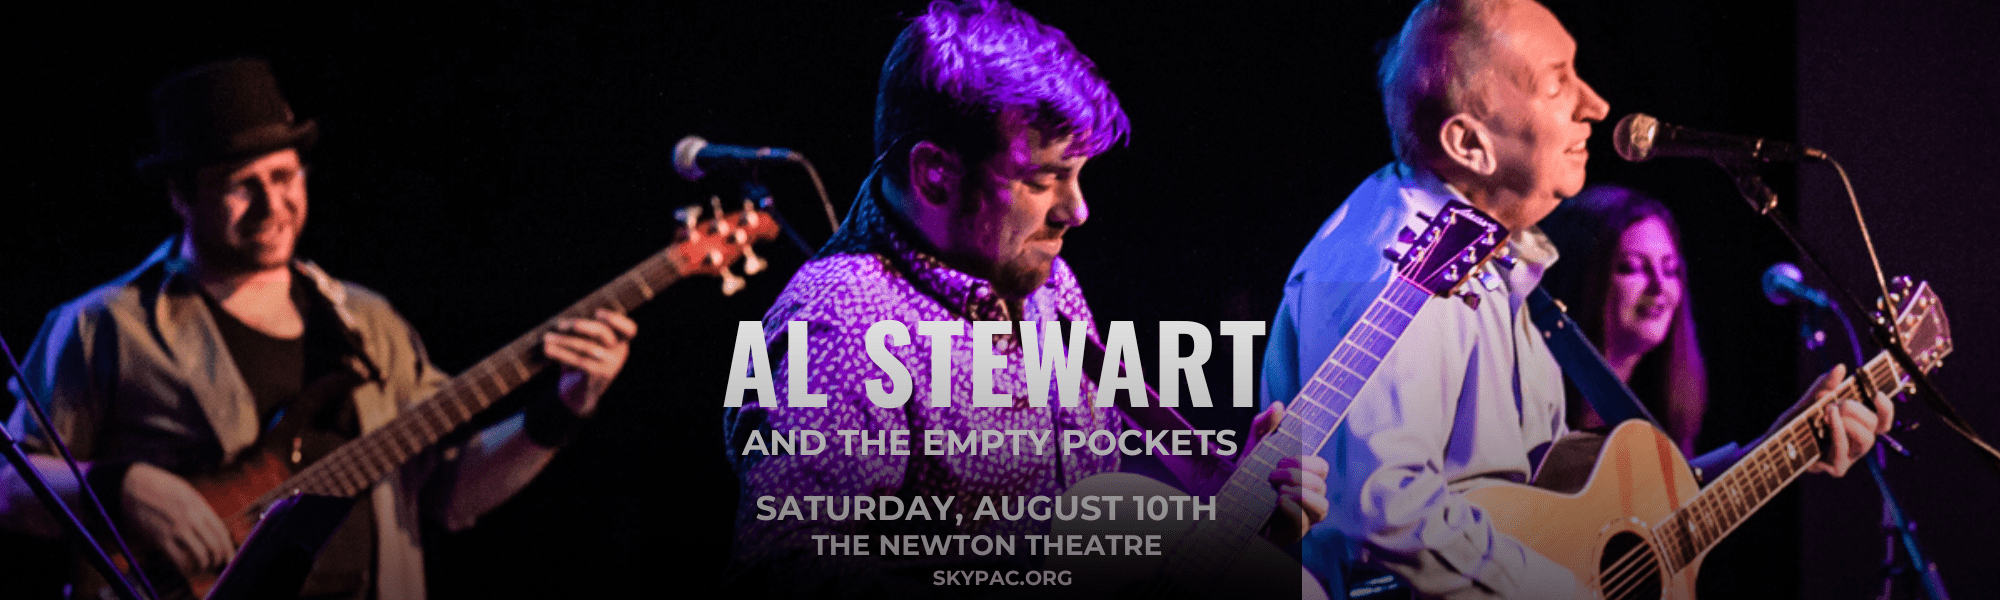 Al Stewart & The Empty Pockets plays The Newton Theatre on Saturday, August 10th.